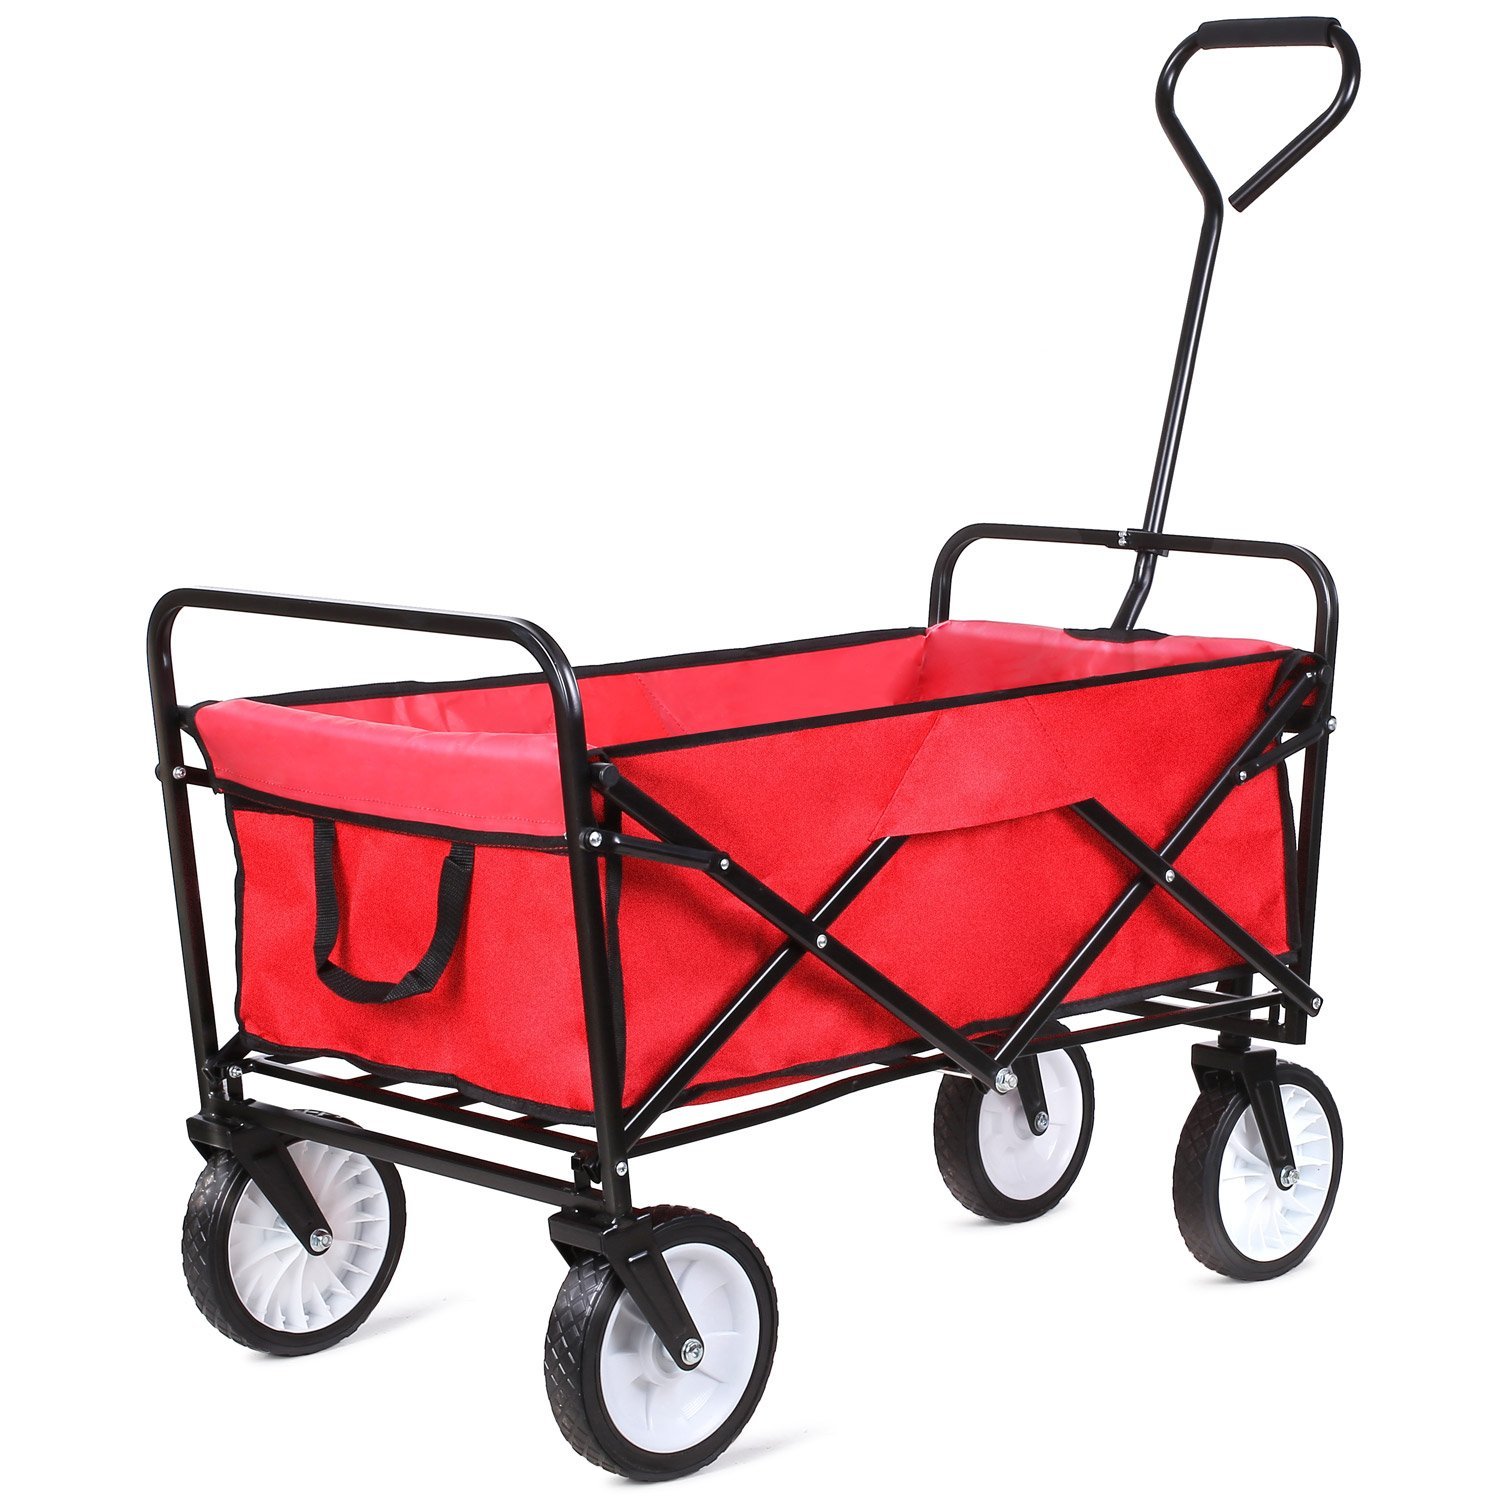 Femor Collapsible Folding Outdoor Utility Wagon [Heavy Duty Garden Cart]-Red